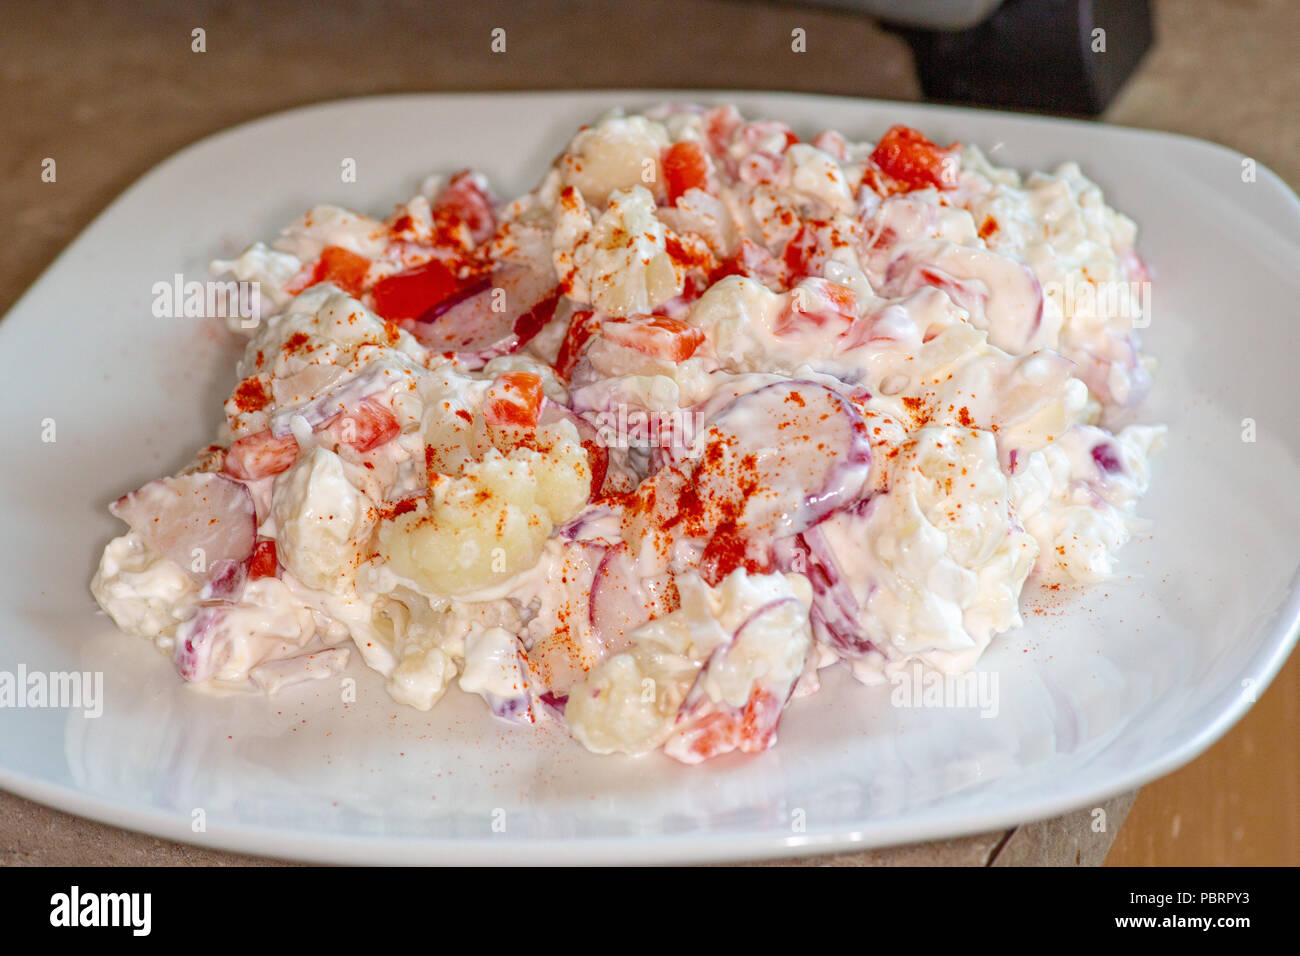 Cauliflower Smash a potato salad substitute that is low carb and good for those on the Keto Diet. Made of Cauliflower, radishes, sweet onions and red Stock Photo